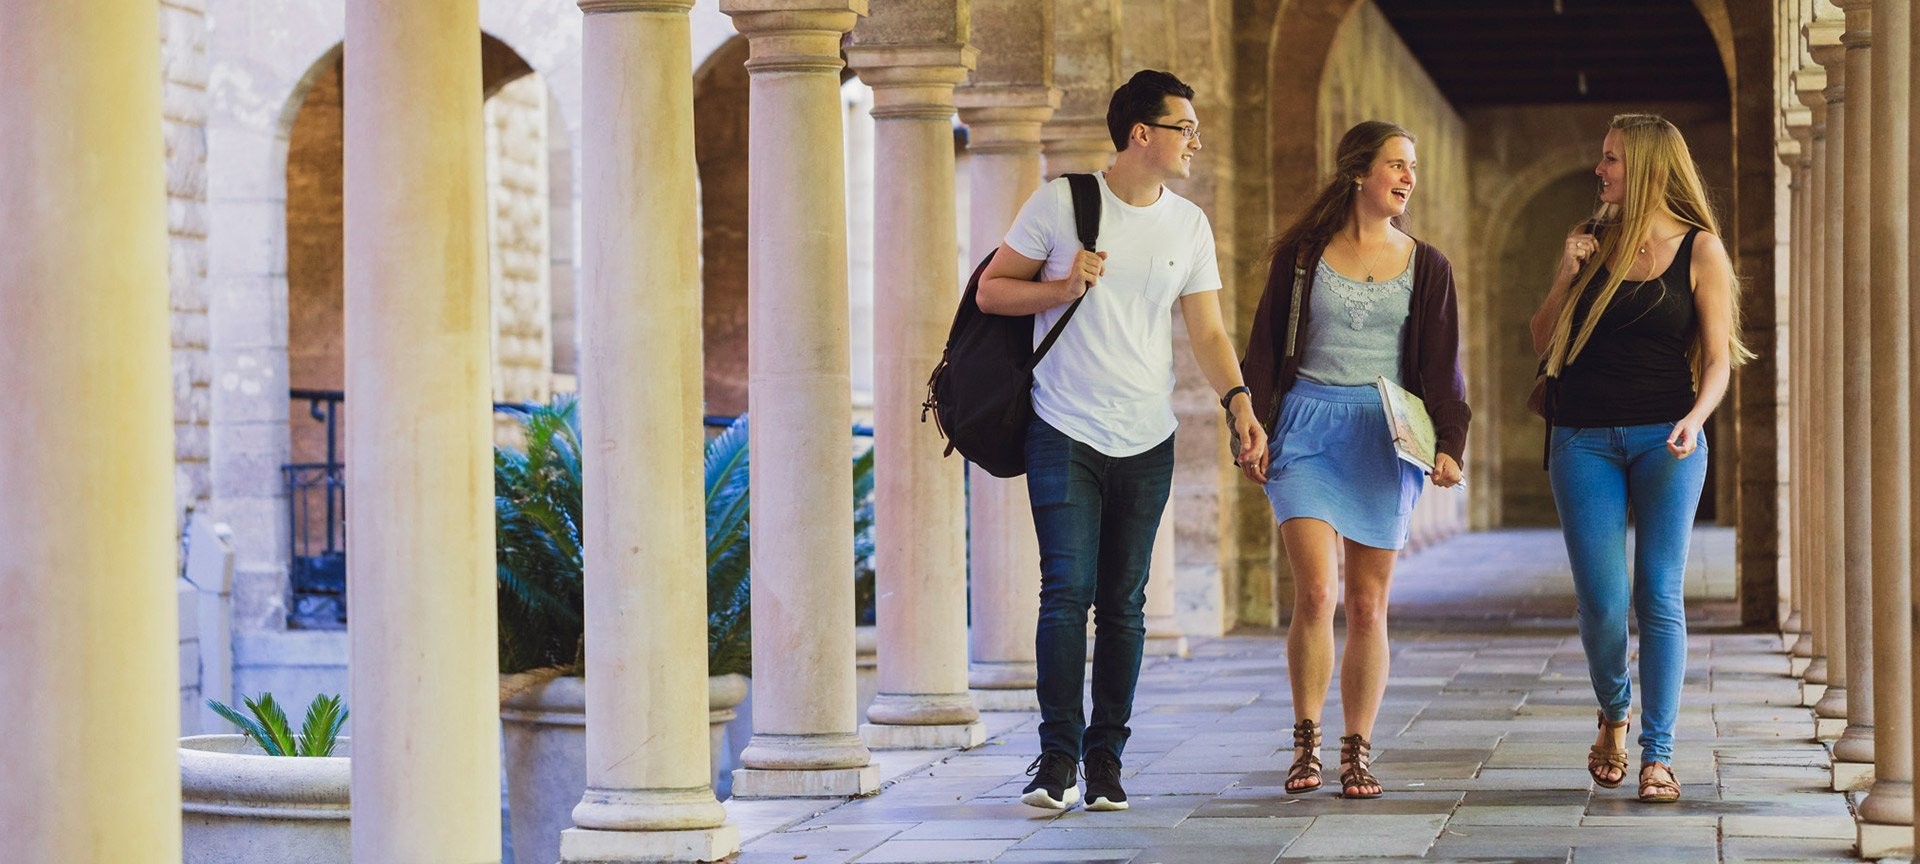 Students walking on the campus of the University of Western Australia